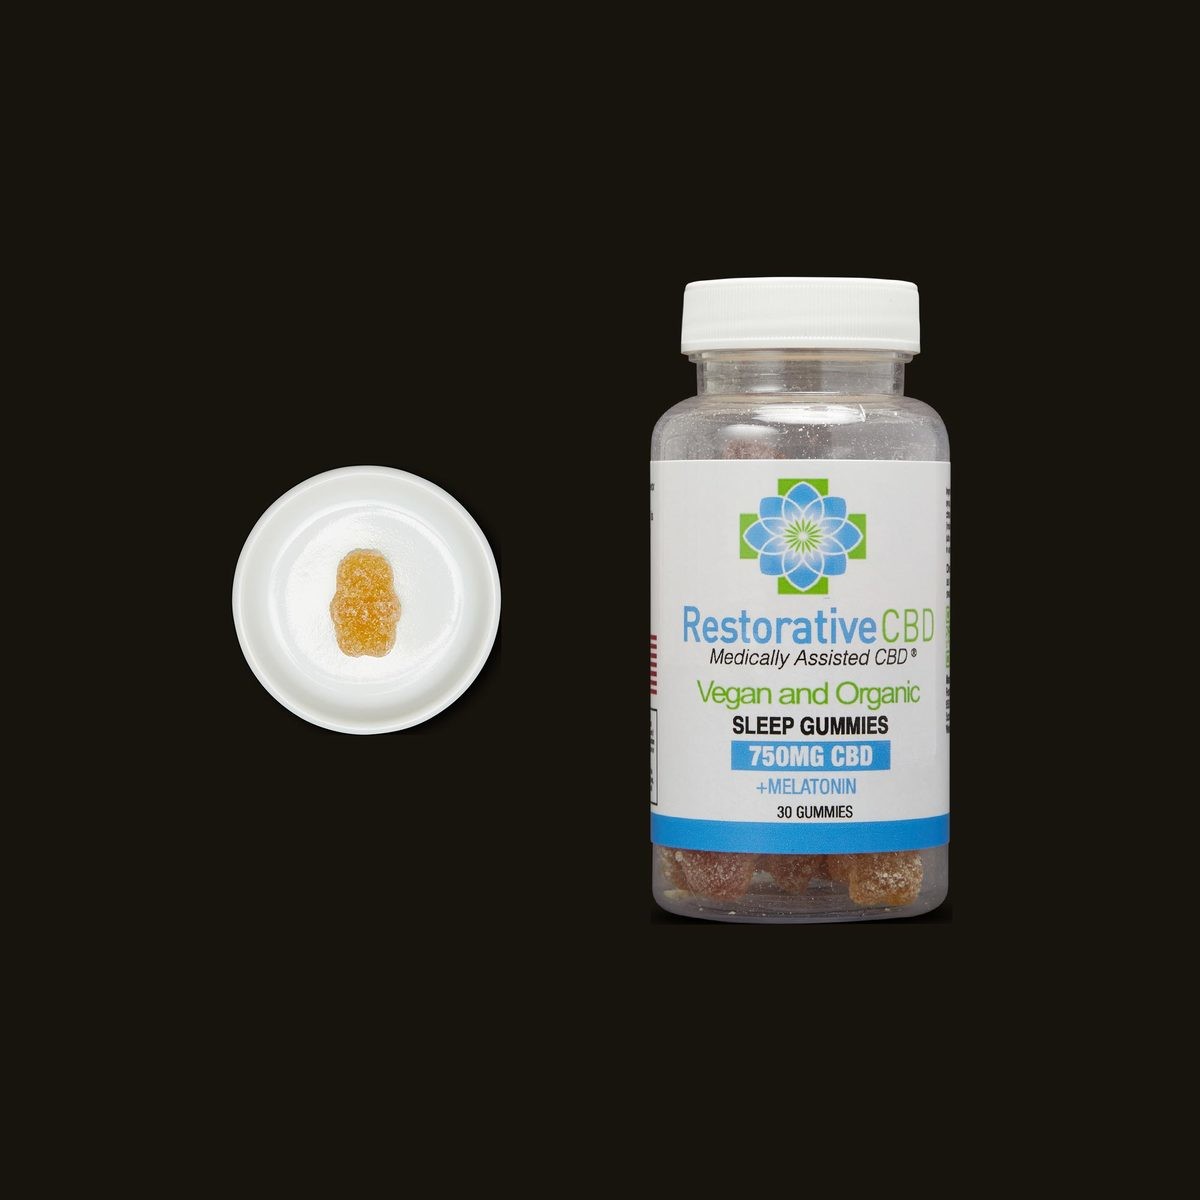 Gummies That Help You Sleep – CBD Gummies for Better Health and Wellbeing